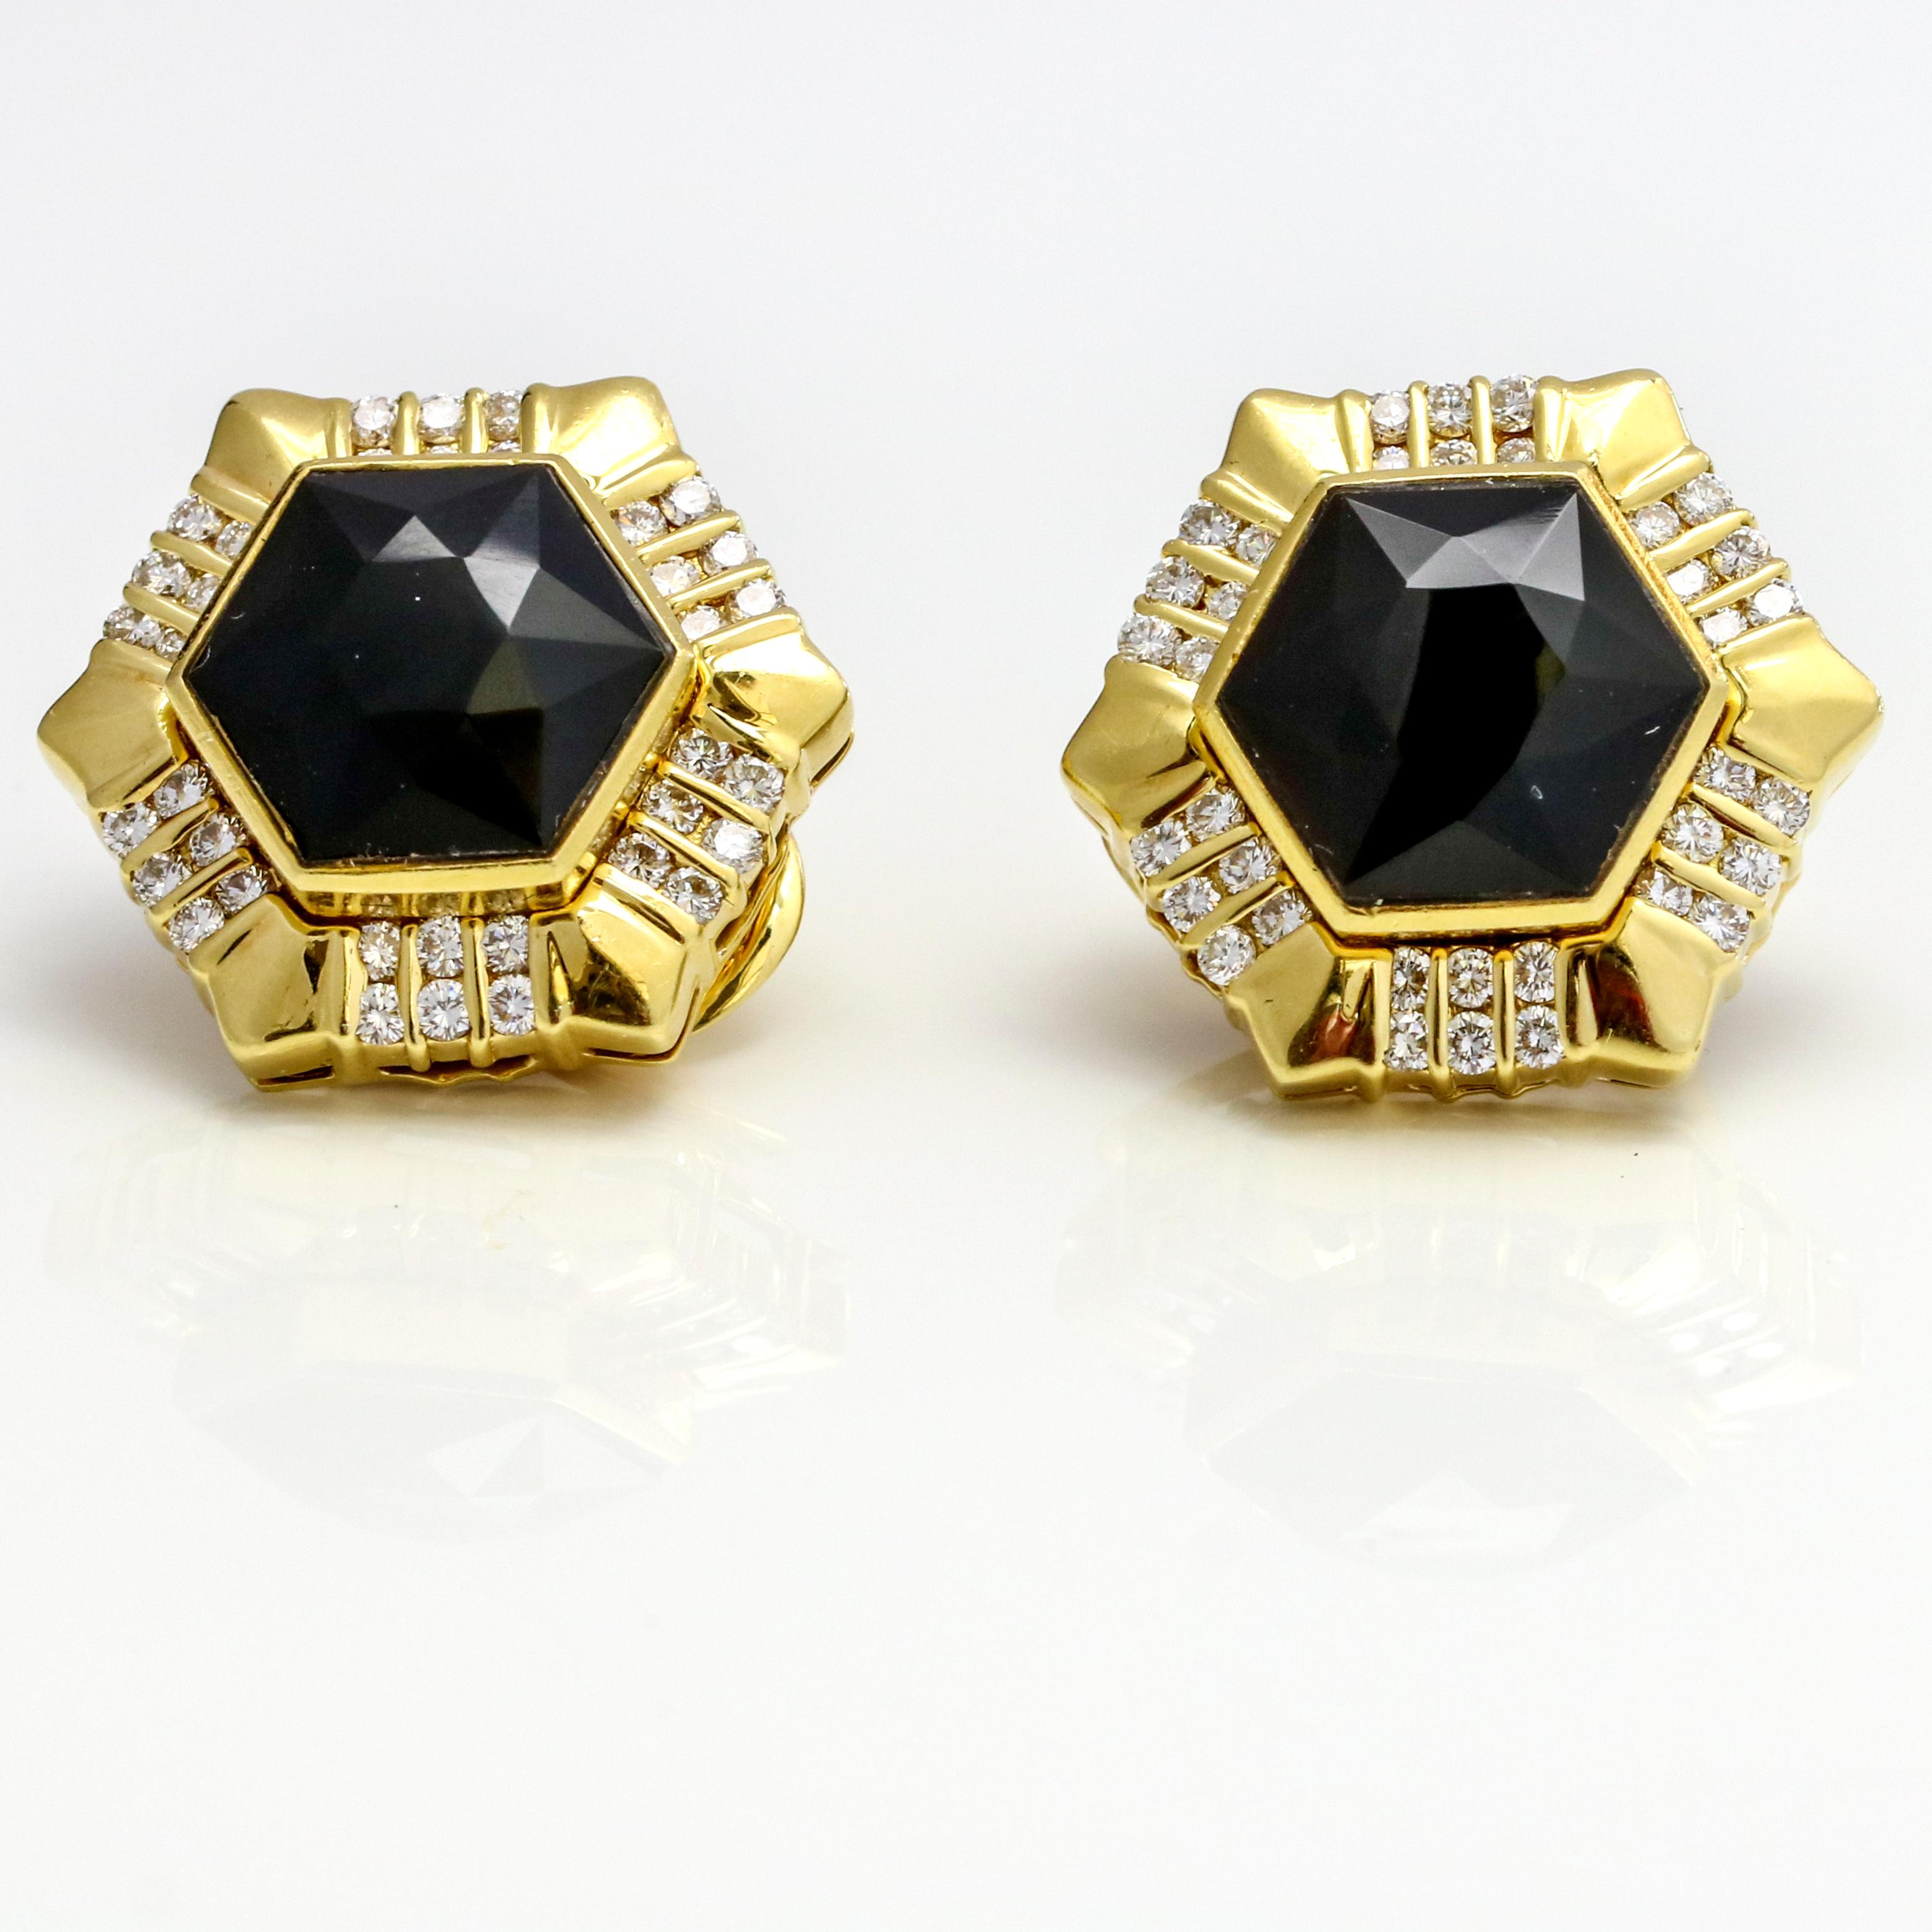 Gemlok hexagon clip-on stud earrings with diamonds and exchangeable gemstone centers in 18-karat yellow gold. The set includes faceted black onyx centers, and black mother of pearl centers. The earrings have 72 round diamonds.

Centers, 12 mm x 14